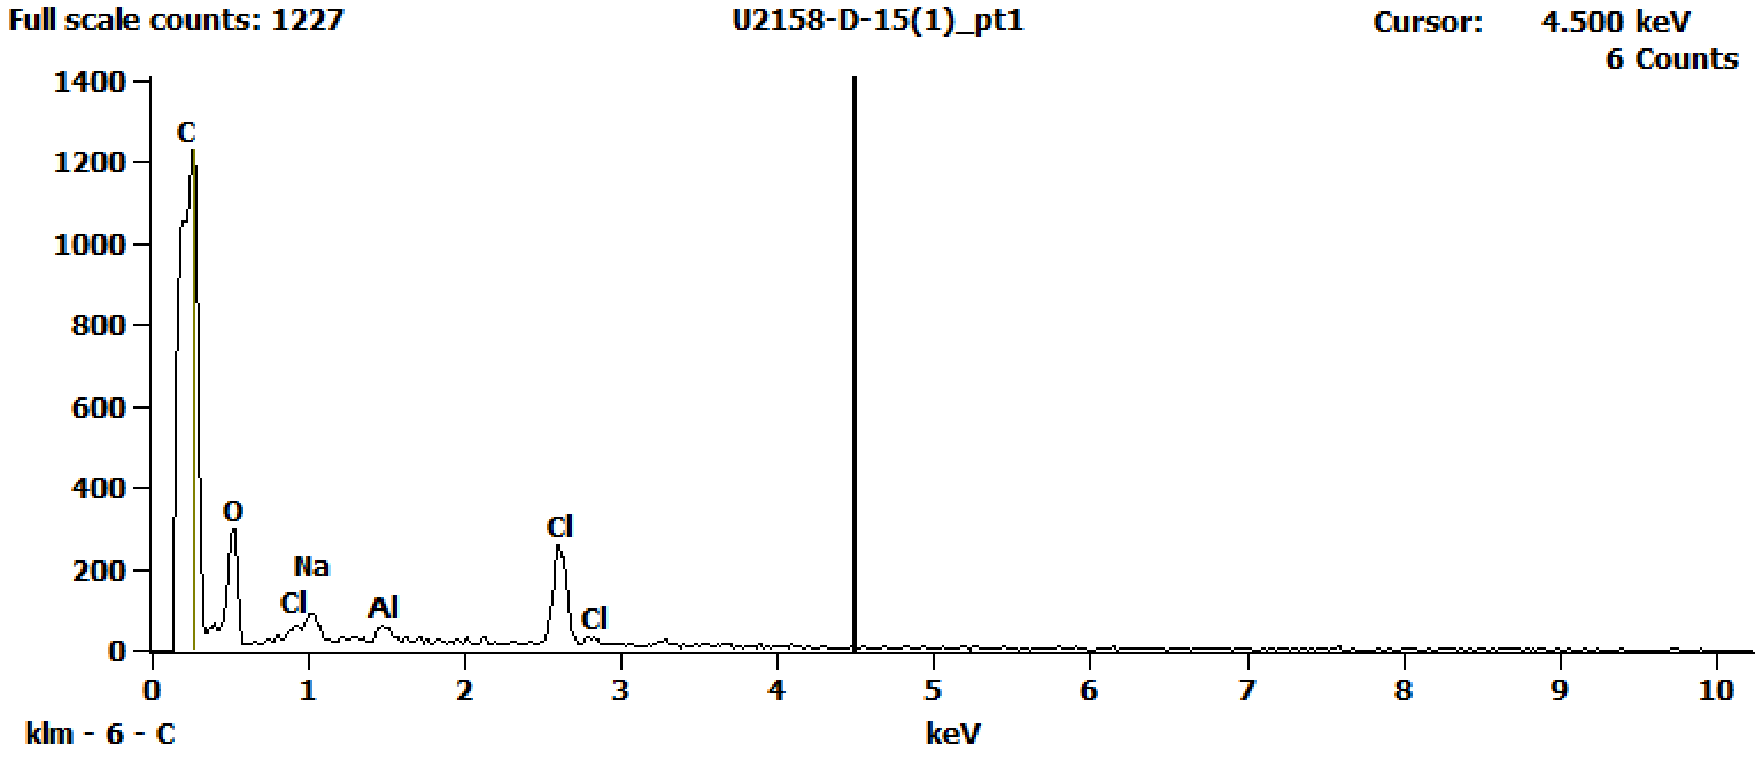 EDS Spectra for sample U2158-D-15 taken at test area 1. The test area is labeled in the particle SEM photo.